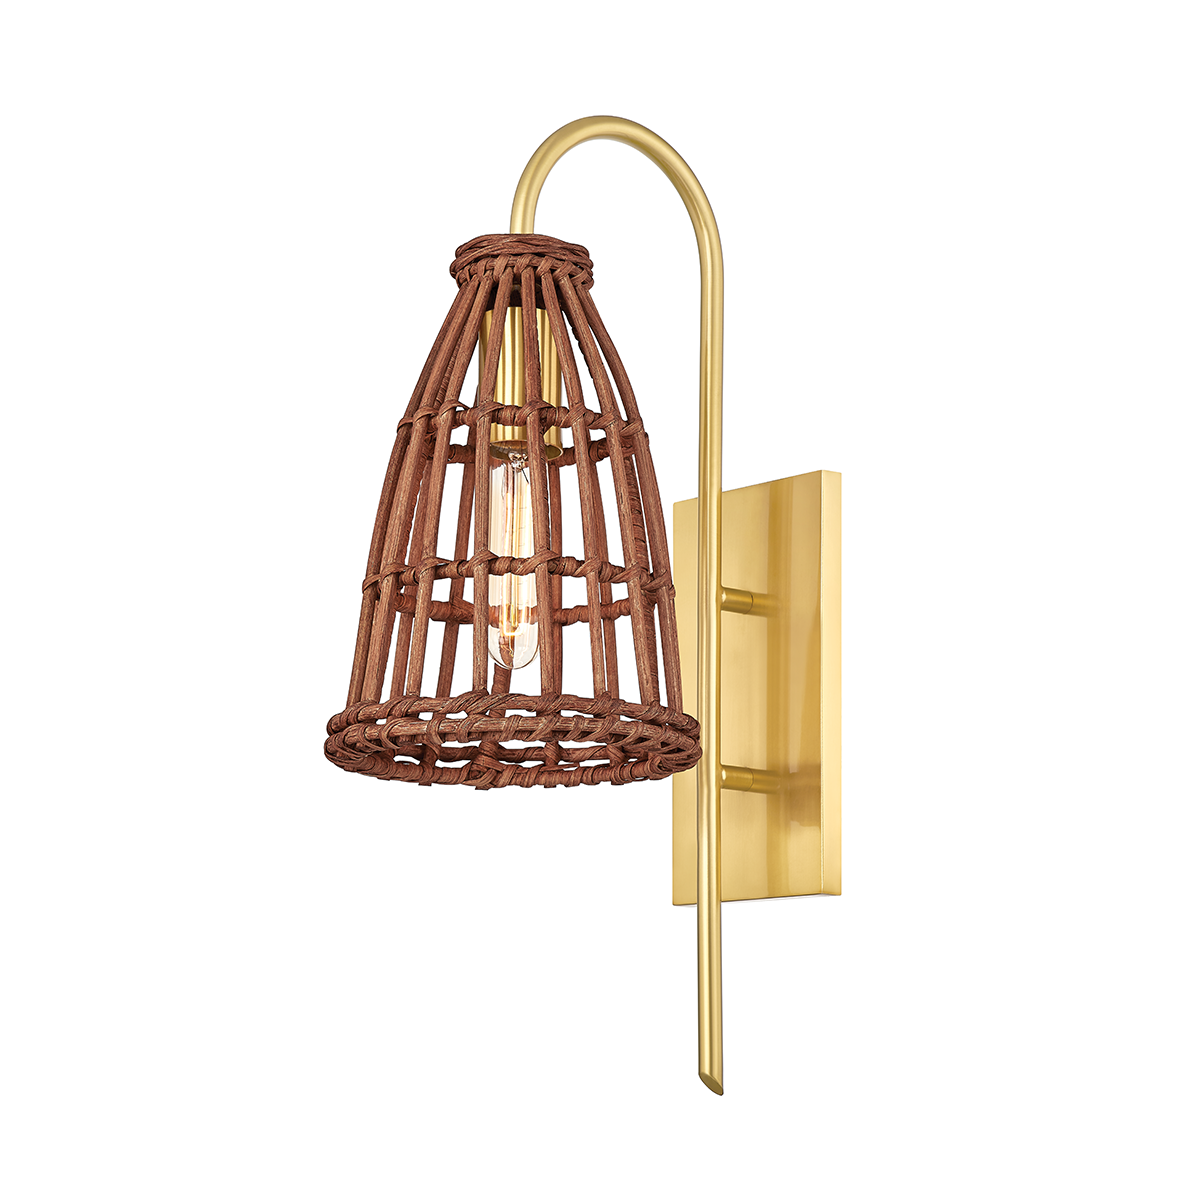 Aged Brass Frame with Natural Rattan Shade Wall Sconce